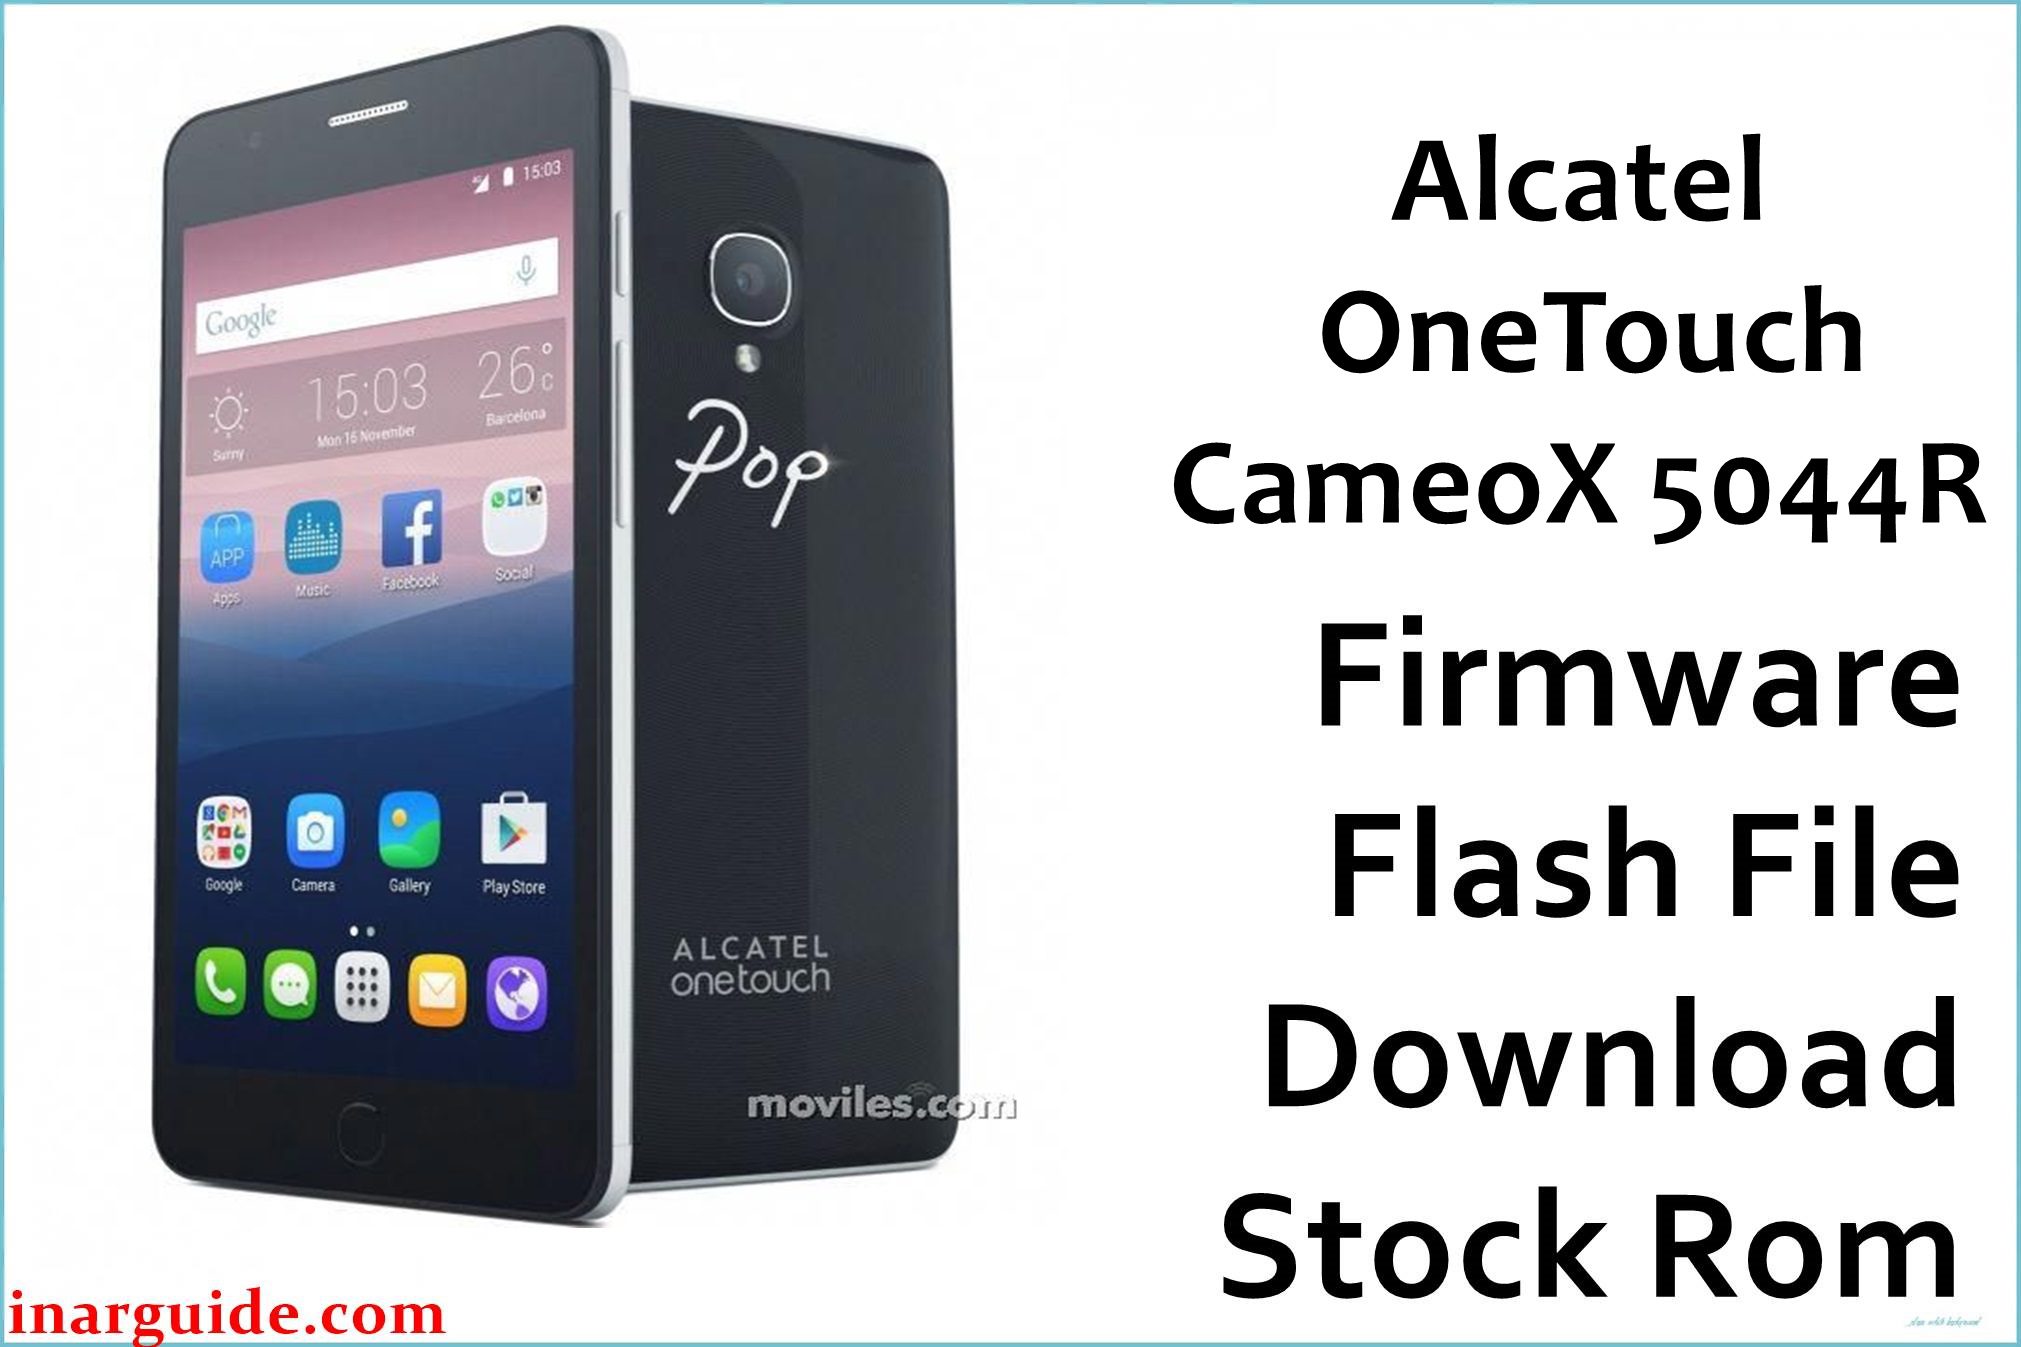 Alcatel OneTouch CameoX 5044R Firmware Flash File Download [Stock ROM] |  Inar Guide